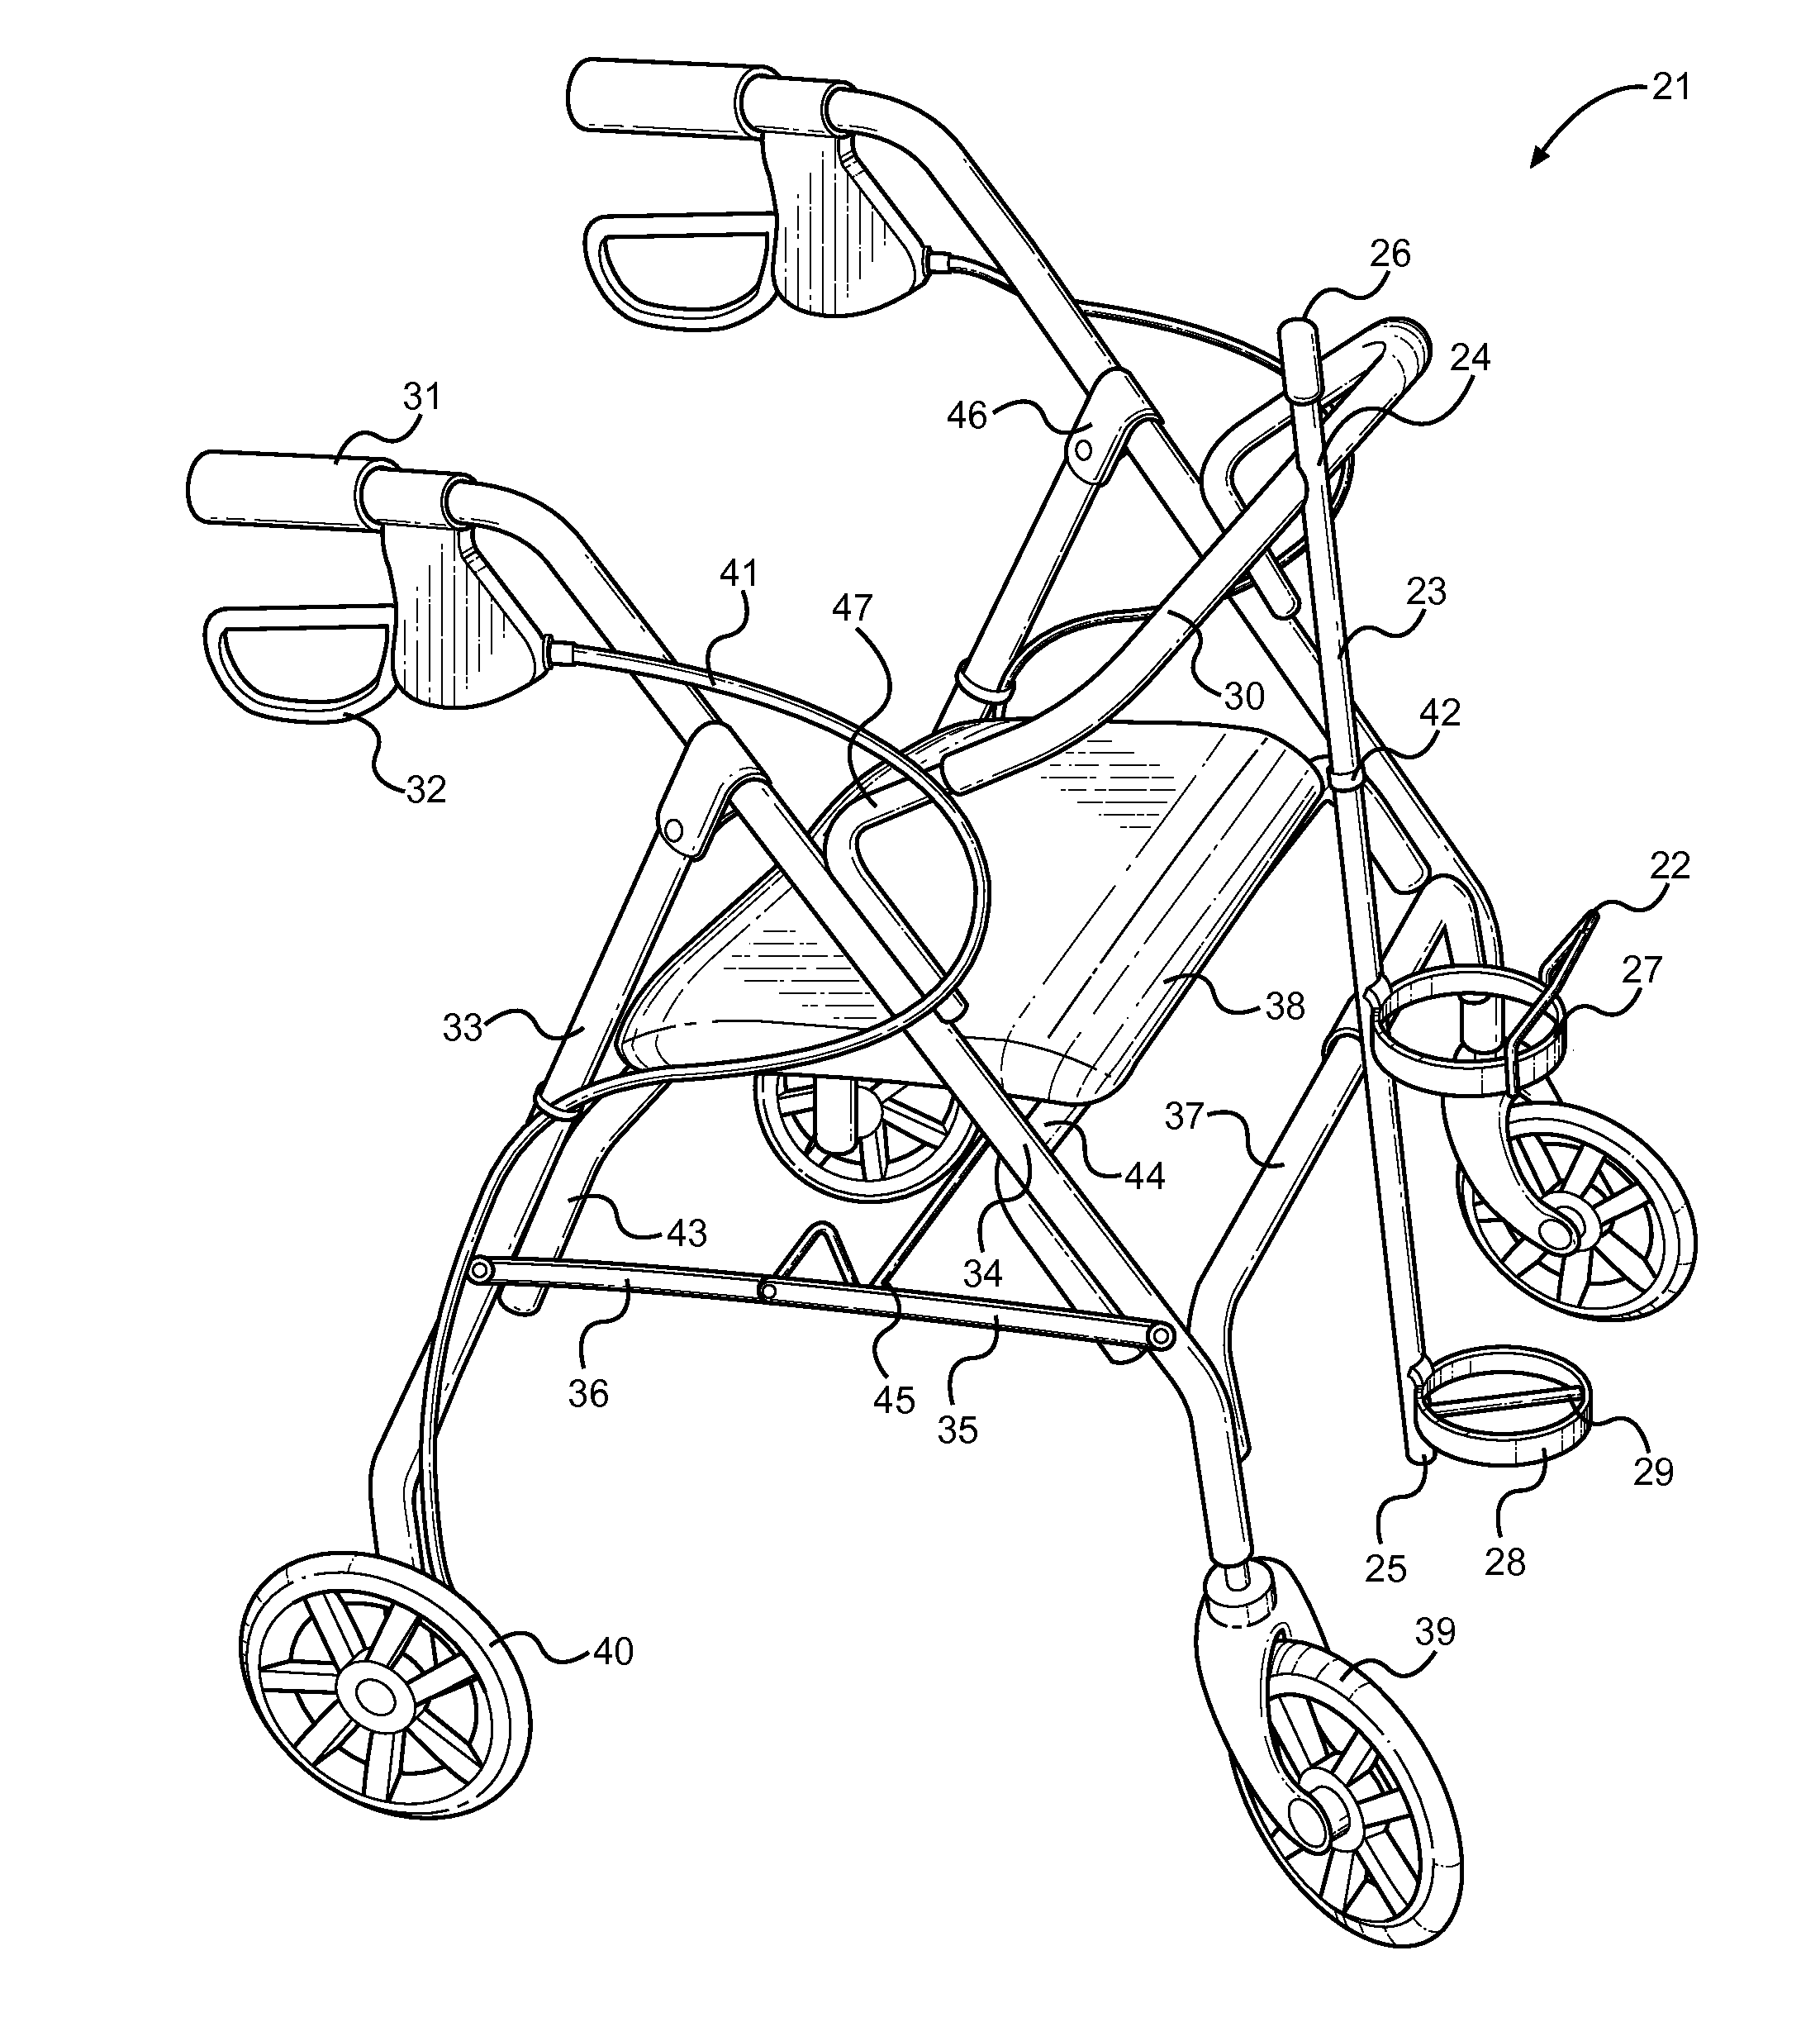 Walker Device with Air Tank Holder